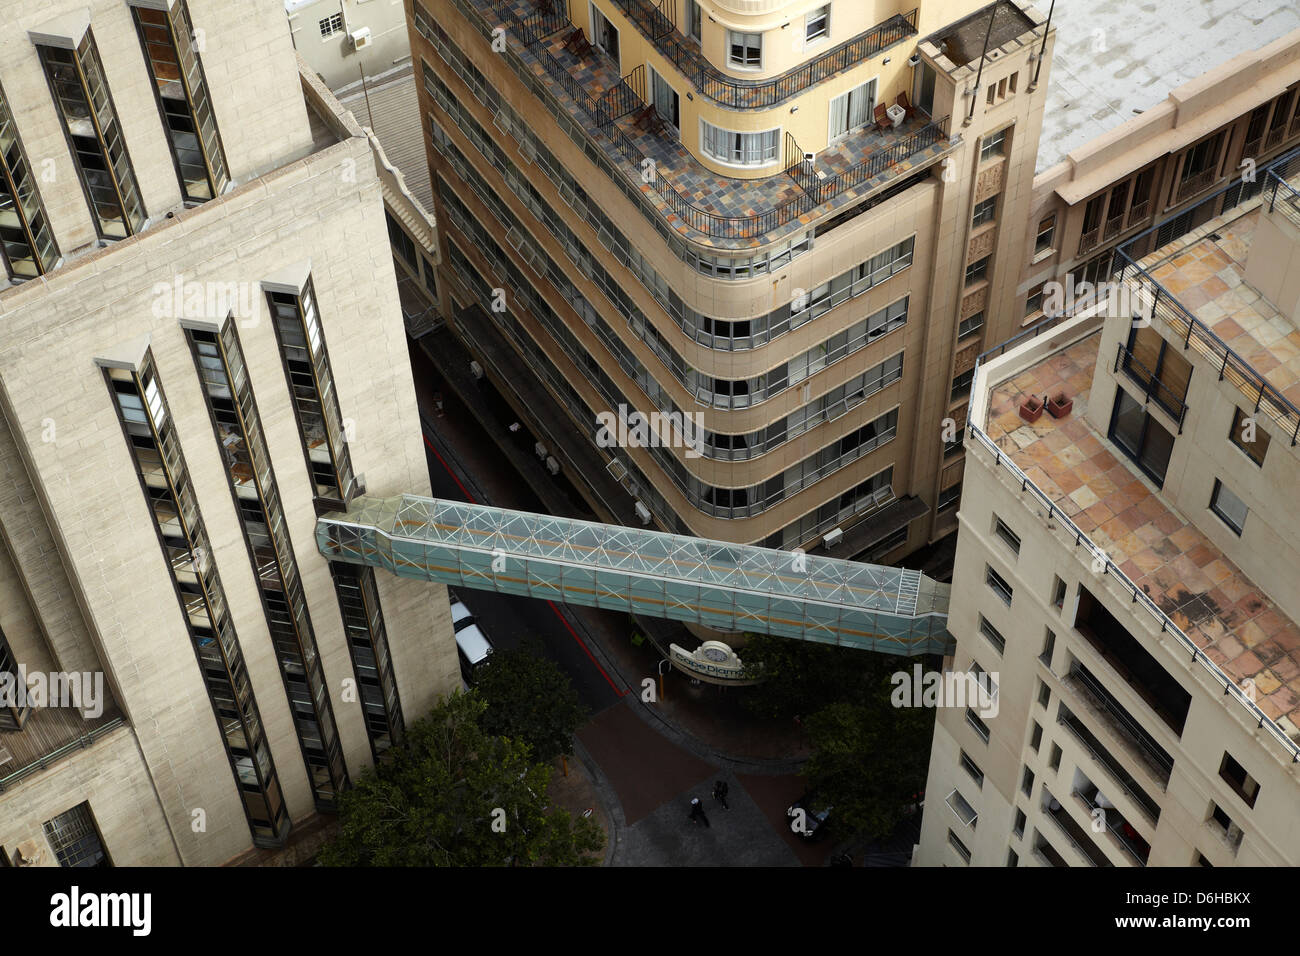 Art deco buildings and aerial walkway, Cape Town, South Africa Stock Photo